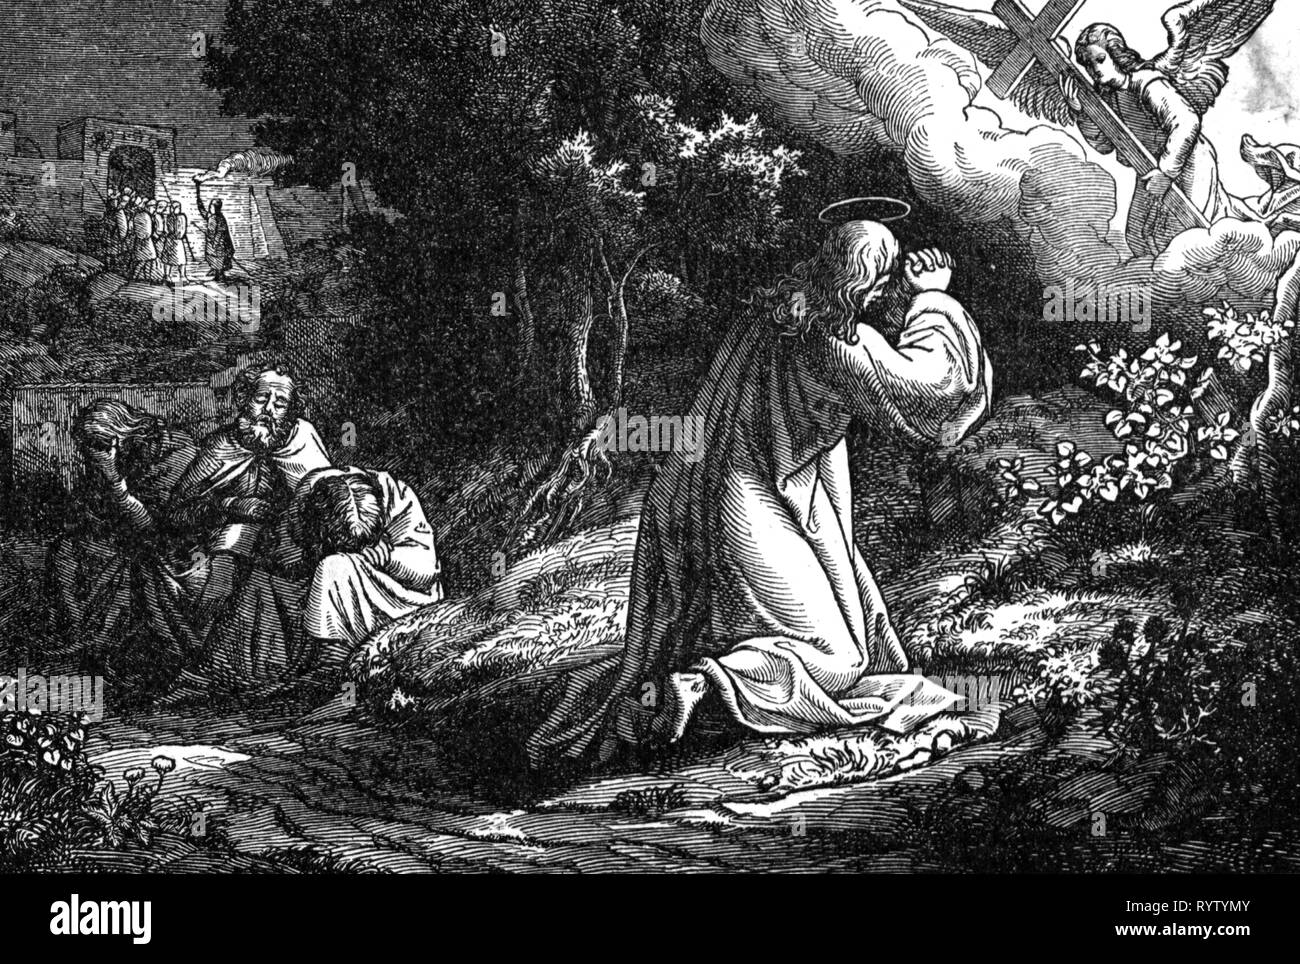 religion, Christianity, Jesus Christ, passion, Jesus on the Mount of Olives, wood engraving, mid 19th century, graphic, graphics, New Testament, half-length, half length, kneel, kneeling, prayer, prayers, praying, pray, angel, angels, cross, crosses, passion, disciple, follower, disciples, followers, sleeping, pretend asleep, black despair, reduce despair, desperate, in desperation, Messiah, Saviour, Redeemer, religion, religions, Mount of Olives, Mount Olivet, historic, historical, man, men, male, people, Additional-Rights-Clearance-Info-Not-Available Stock Photo